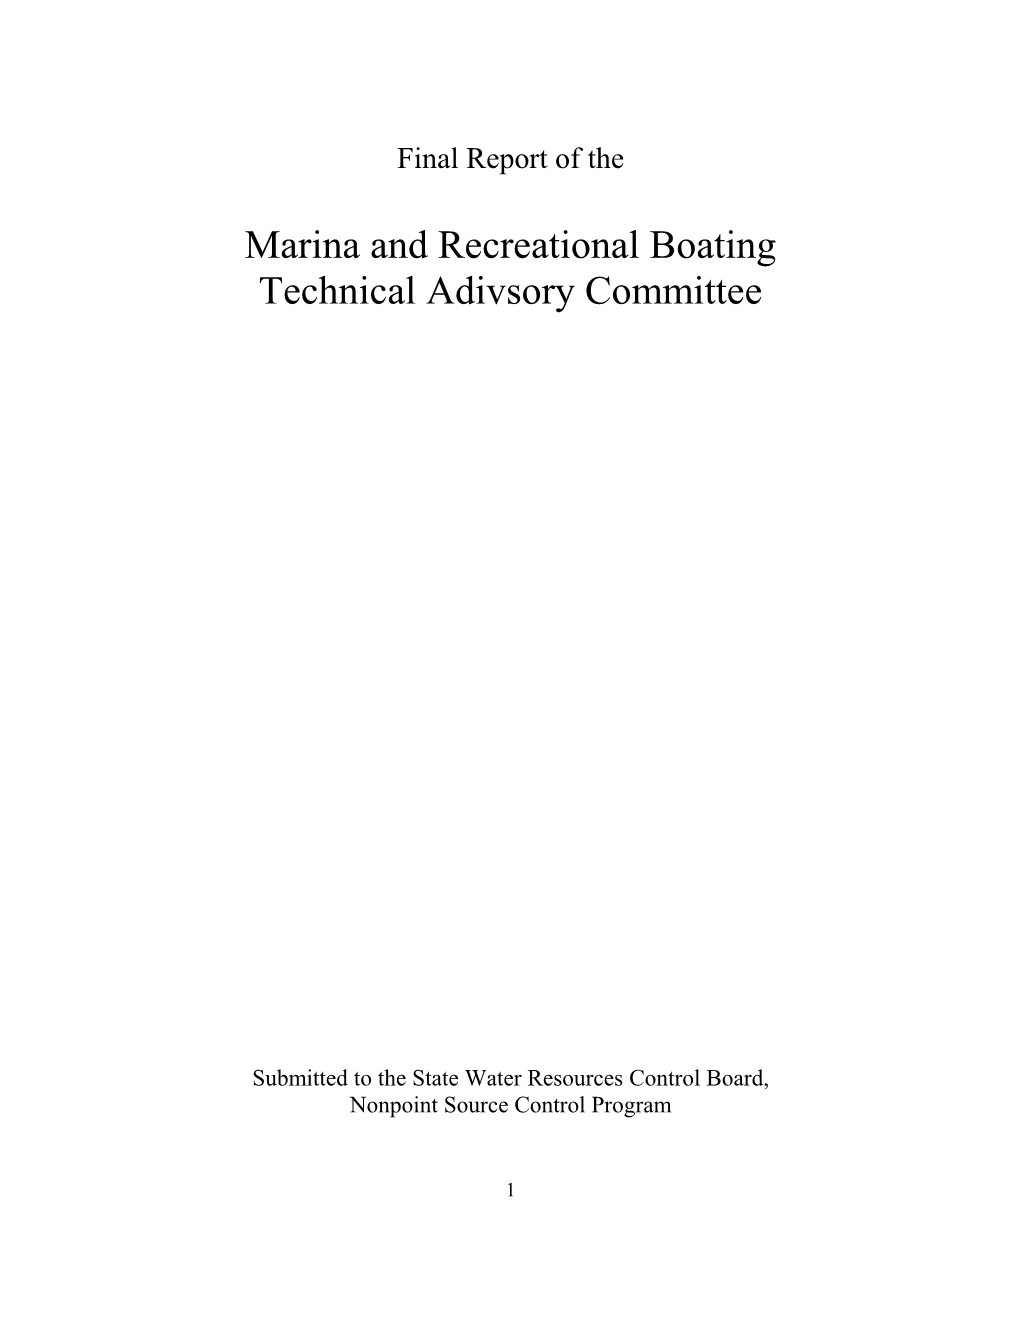 Marinas and Recreational Boating TAC Final Report